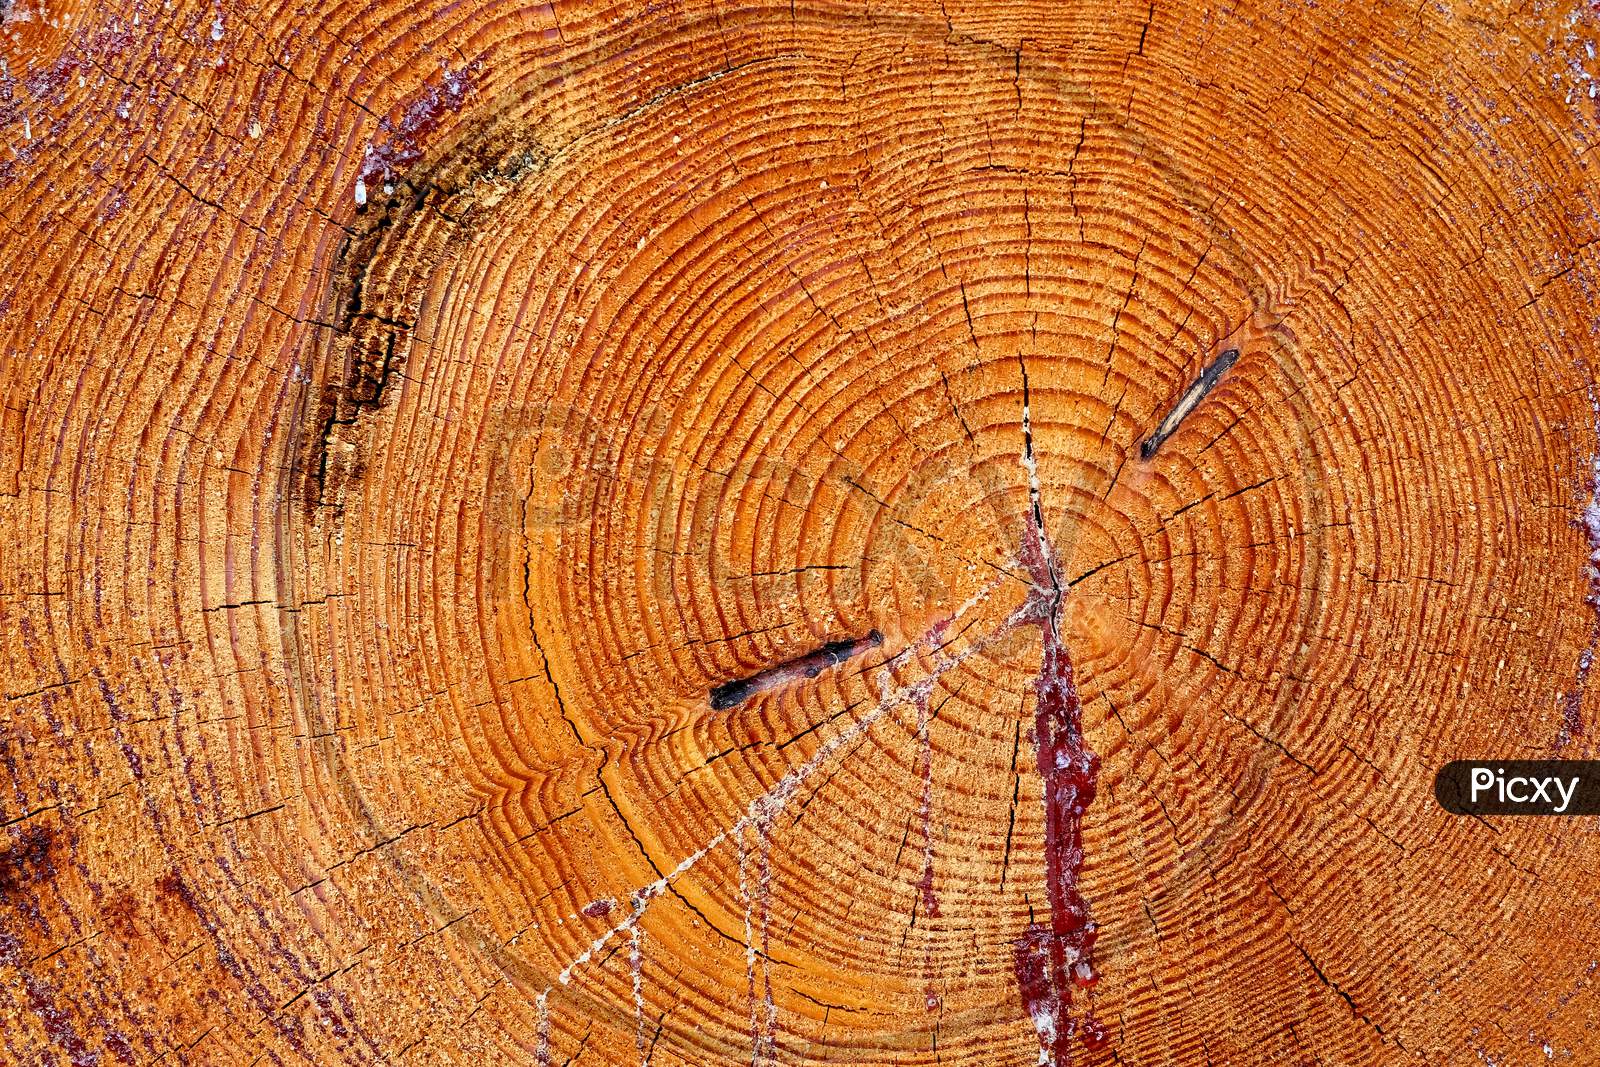 Fresh sawed wood in a close up view. Detailed texture of annual rings in a wooden surface.